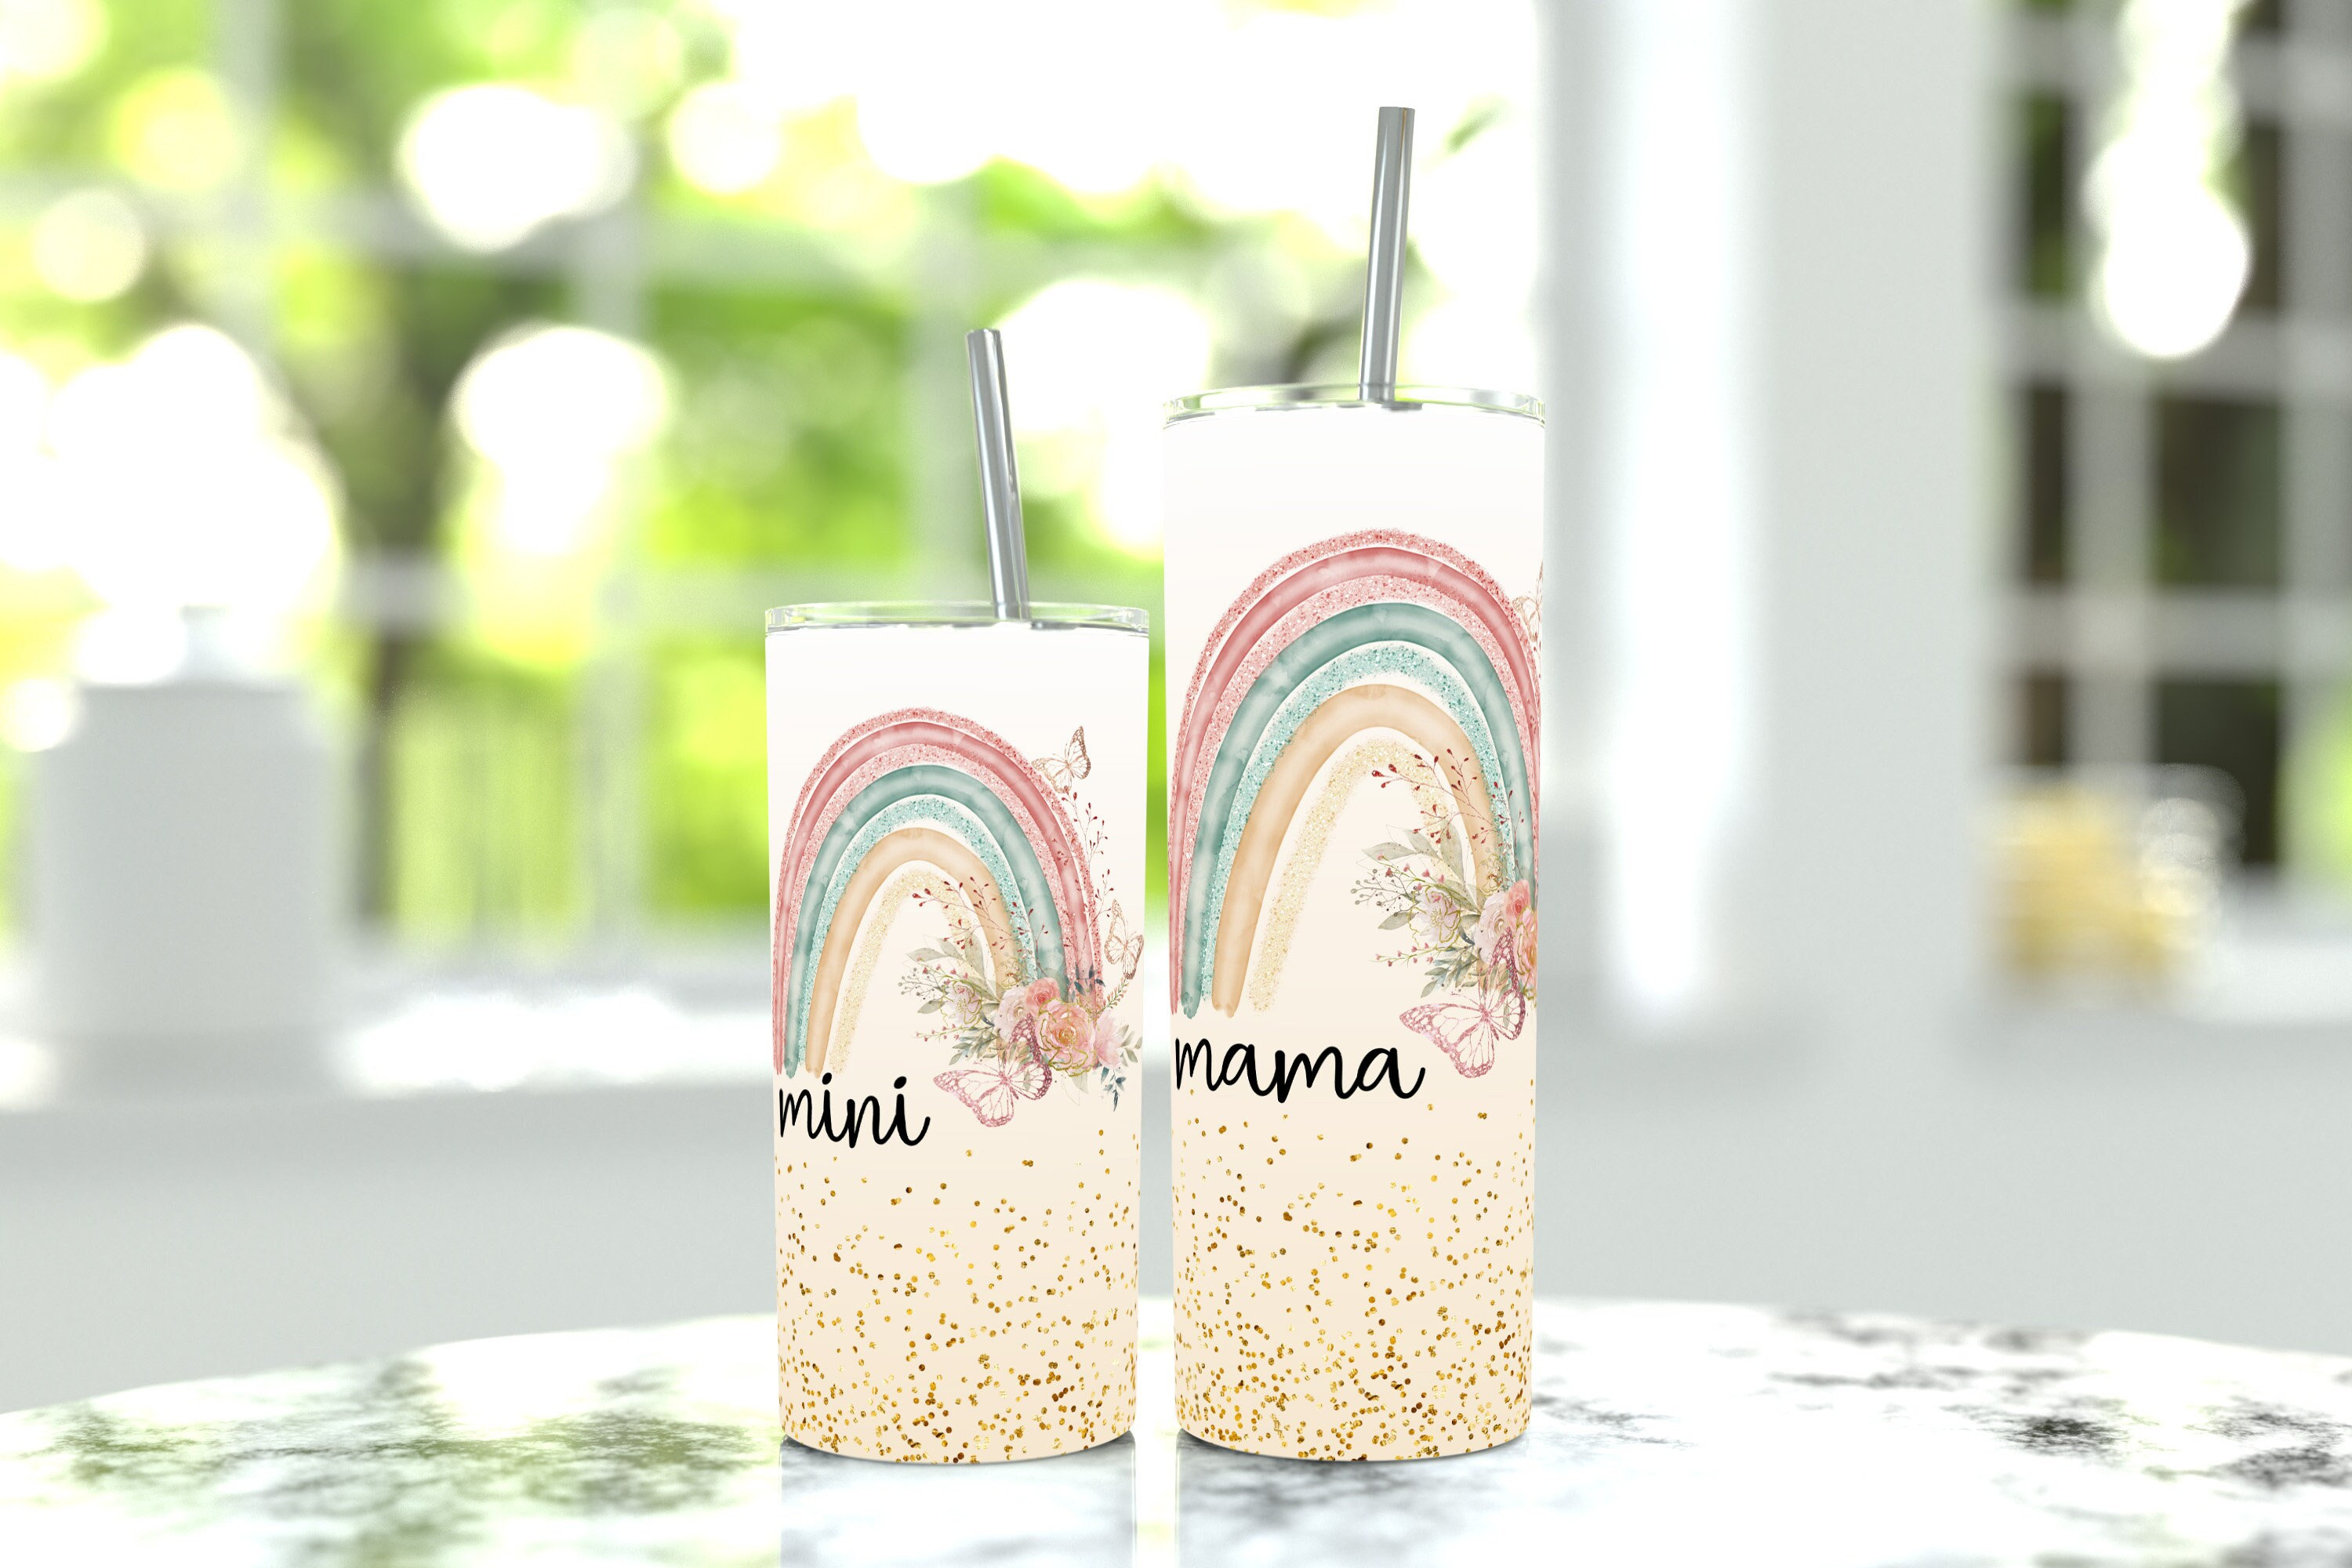 Simple Modern Mommy & Me Cups, Gallery posted by emmafearsmayo